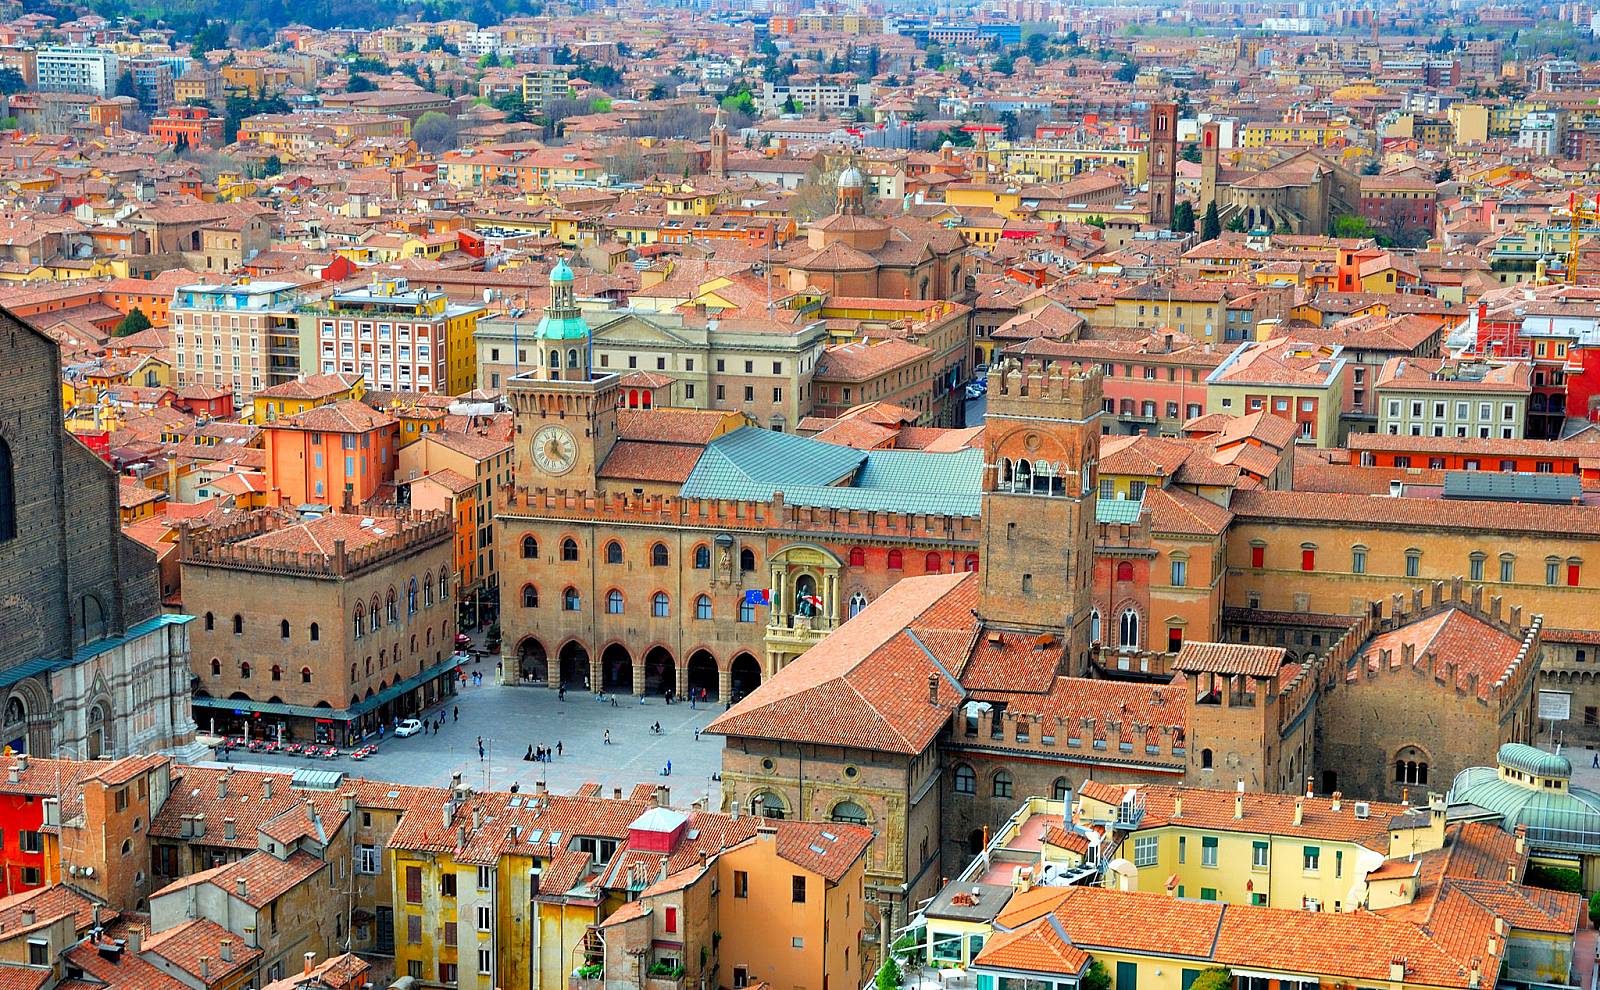 Architecture and Design - Best Italian cities | You can visit us at our website, www.essentialhome.eu and check our Pinterest @midcenturyblog to get more #MidCenturyModern inspiration. best italian cities Architecture and Design &#8211; Best Italian cities Architecture and Design Best Italian cities 1